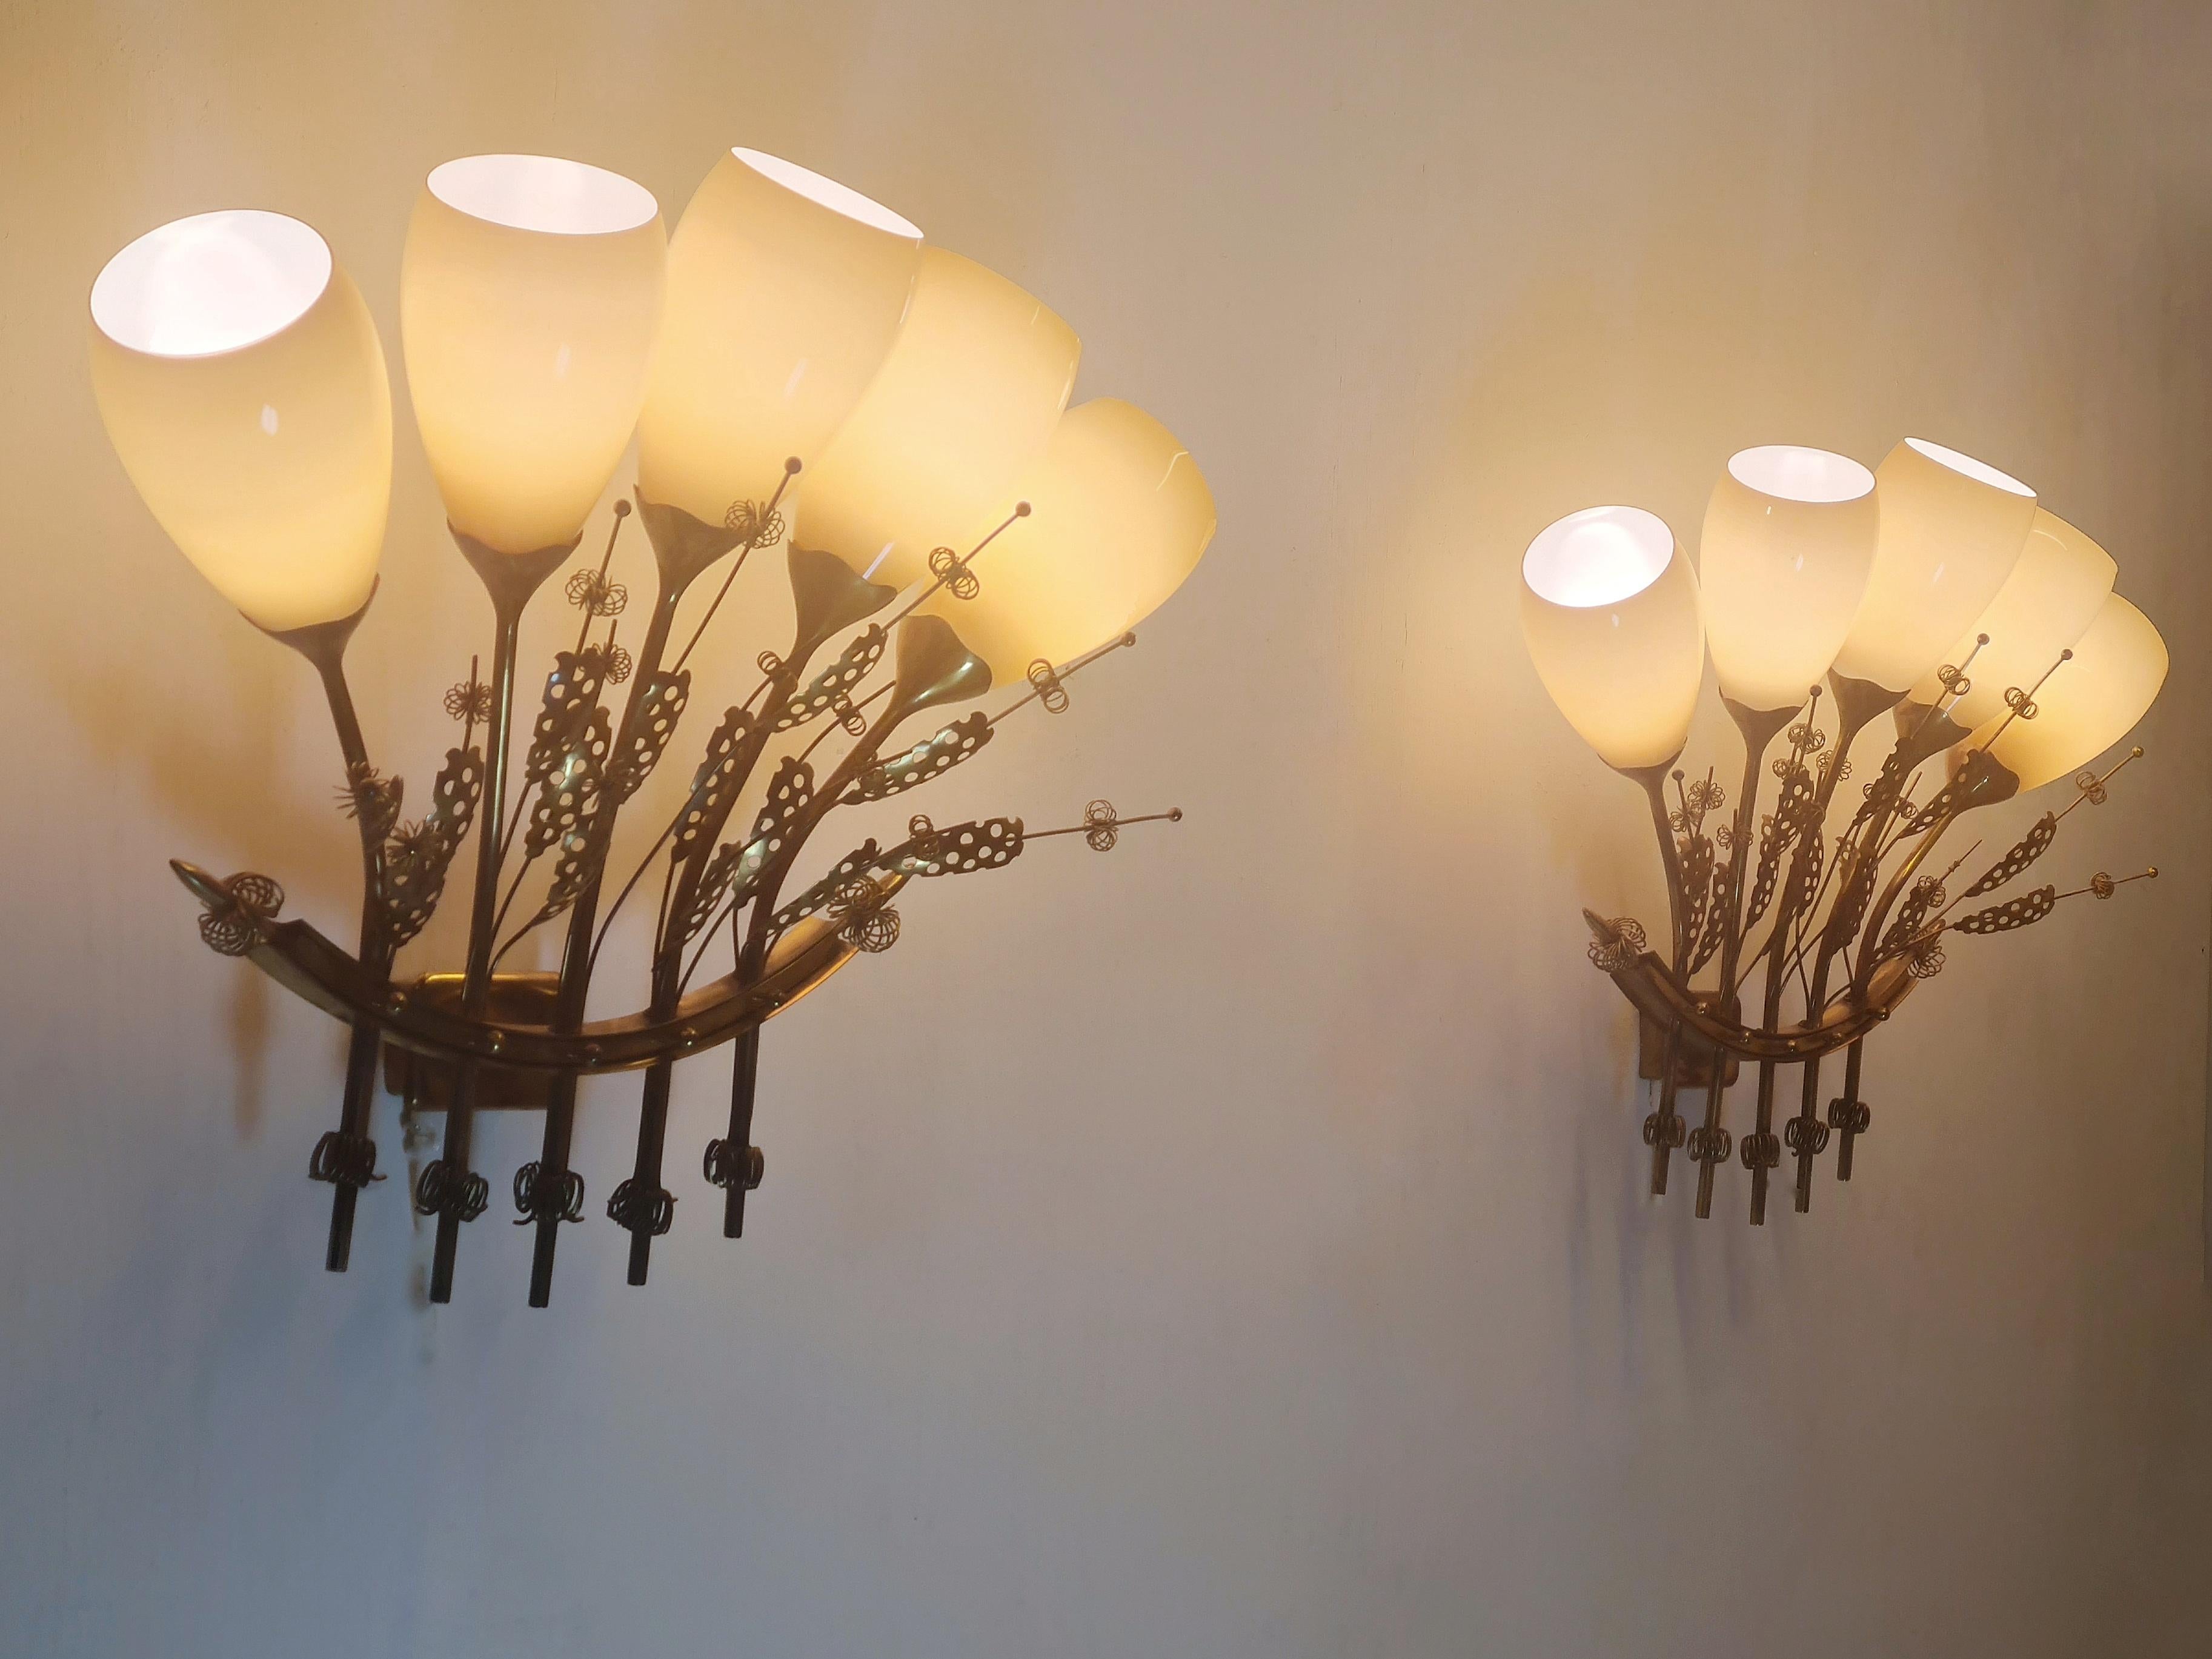 A Pair of Impressive Paavo Tynell Commissioned Wall Lamps, Taito c. 1950s For Sale 1